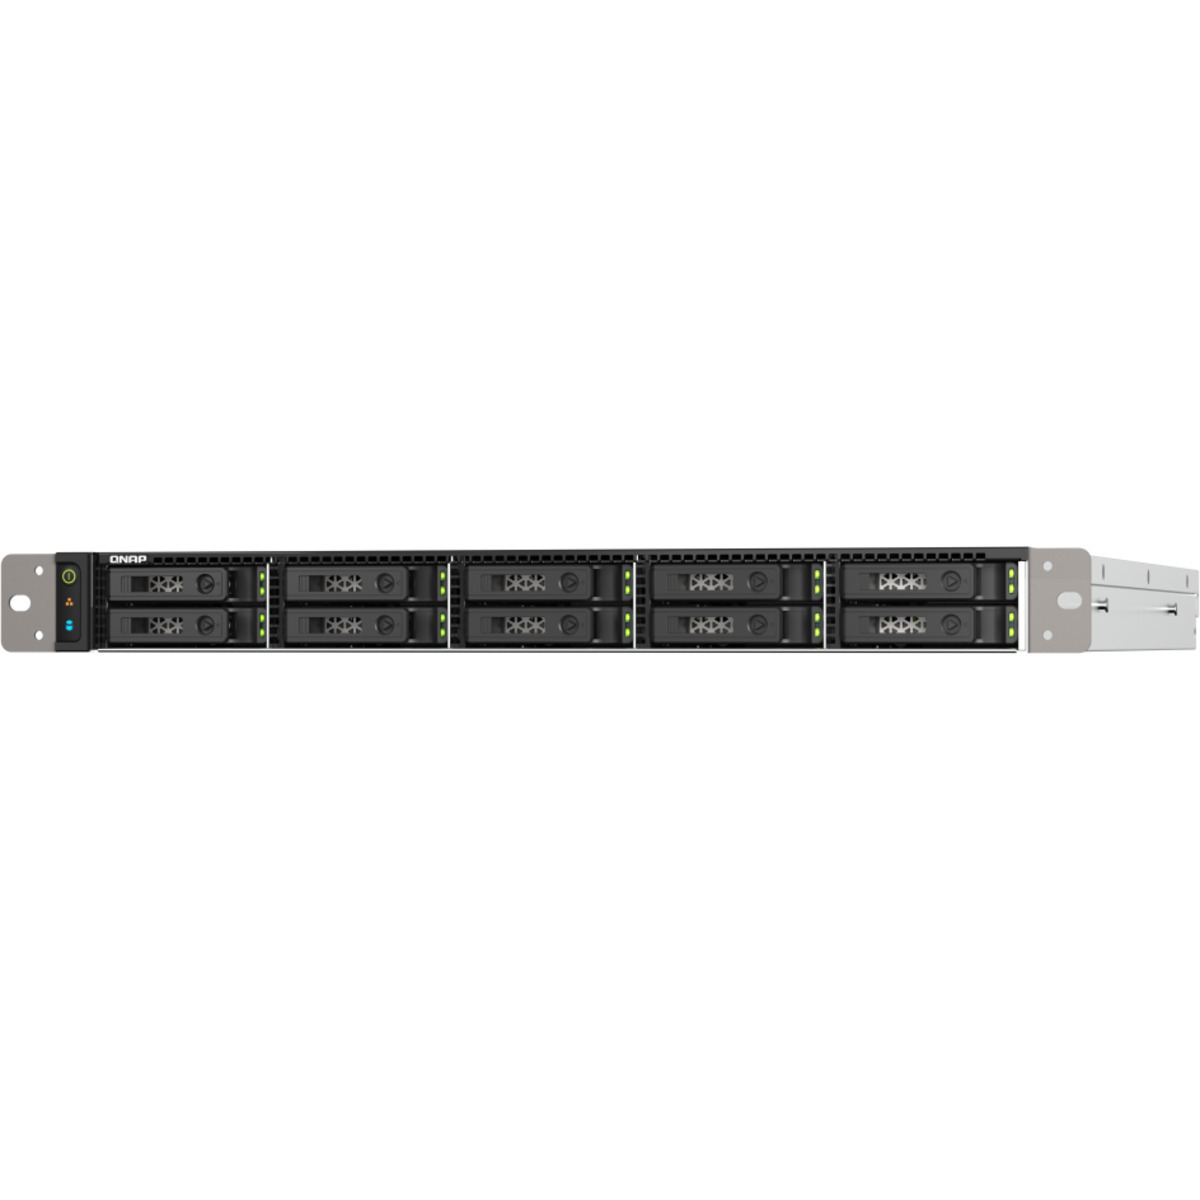 QNAP TS-h1090FU-7302P 80tb 10-Bay RackMount Large Business / Enterprise NAS - Network Attached Storage Device 10x8tb TeamGroup EX2 Elite T253E2008T0C101 2.5 550/520MB/s SATA 6Gb/s SSD CONSUMER Class Drives Installed - Burn-In Tested TS-h1090FU-7302P